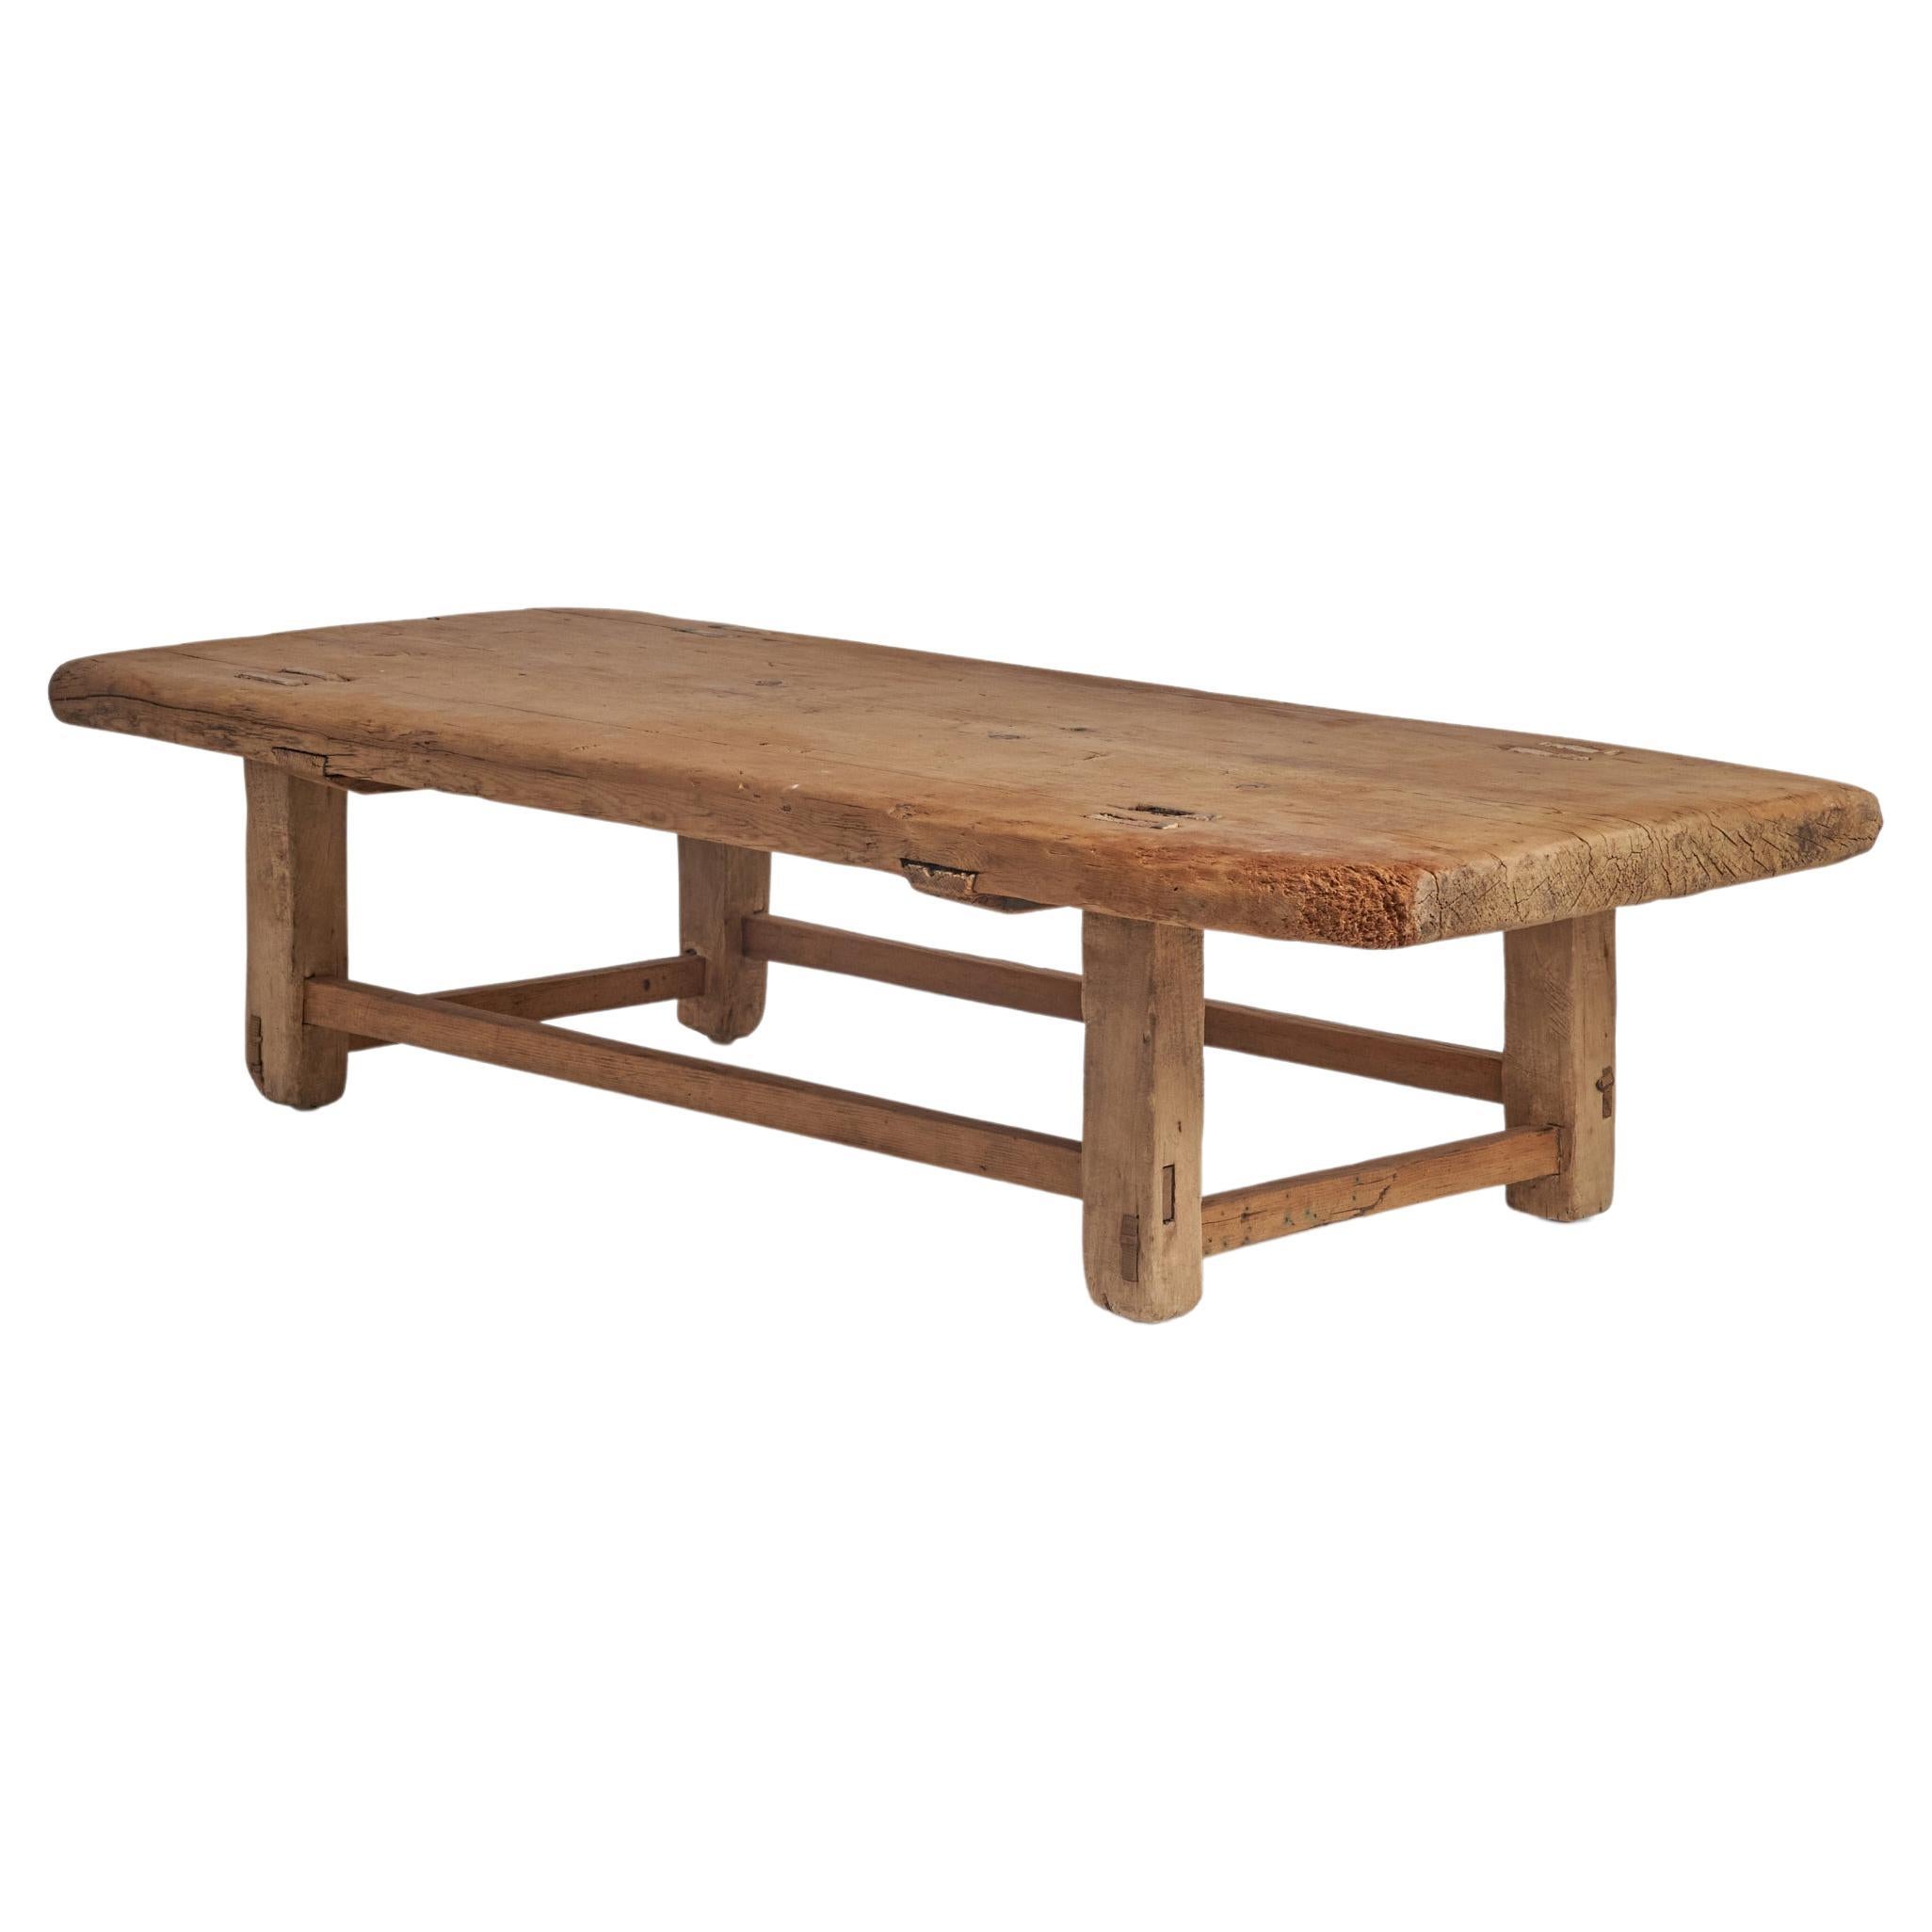 Swedish Craft, Farmers Low Table or Bench, Pine, Sweden, c. 1900